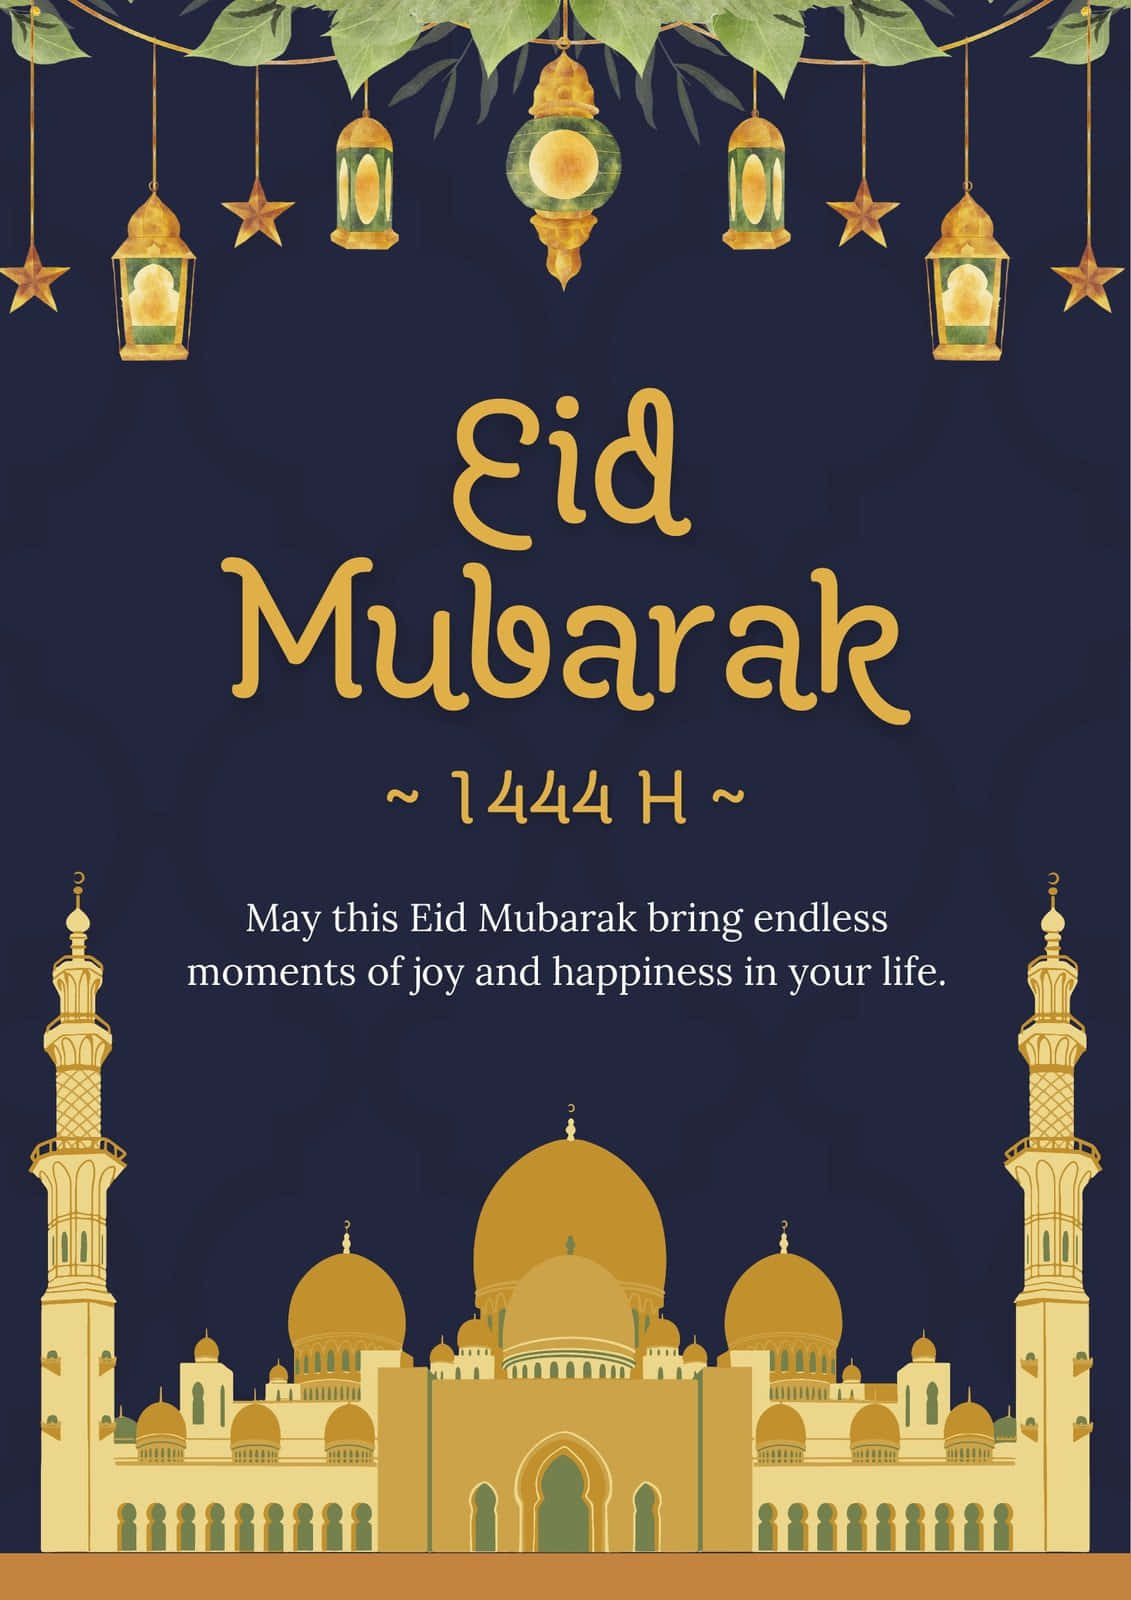 Eid Mubarak Greeting Card With A Mosque And Lanterns